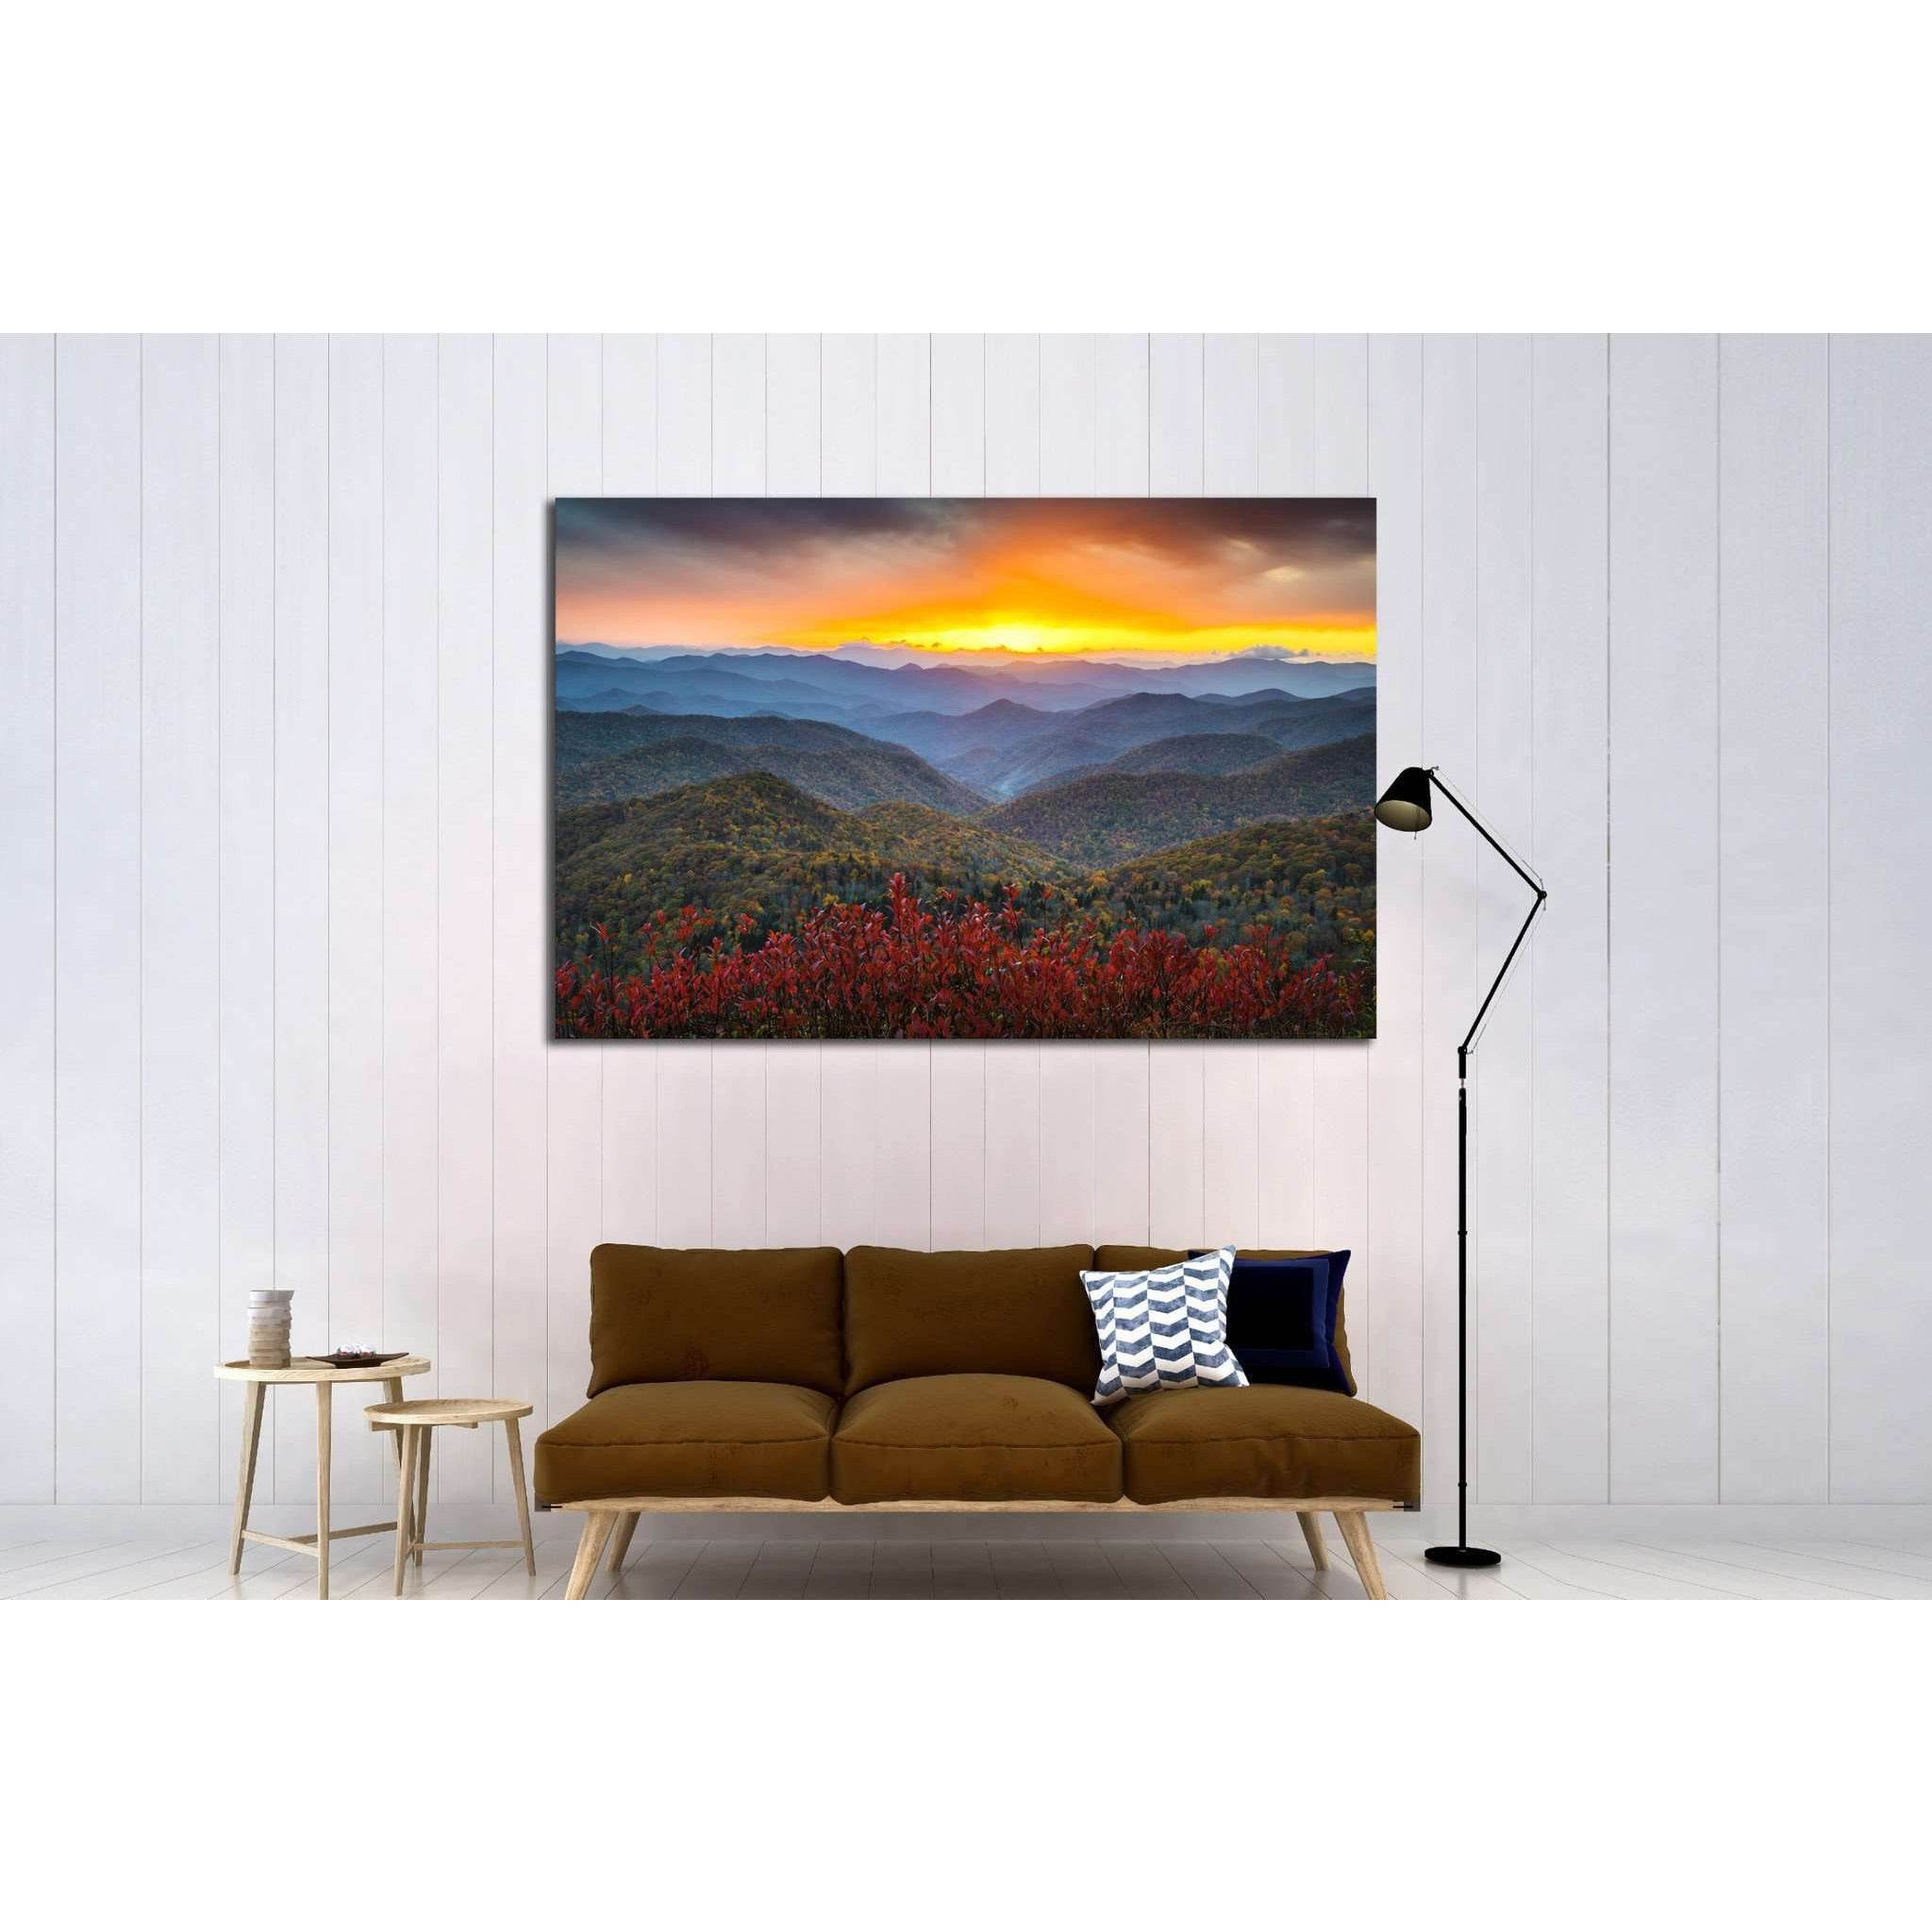 Blue Ridge Parkway Appalachian Mountains Sunset Western NC Scenic Landscape №1963 Ready to Hang Canvas Print